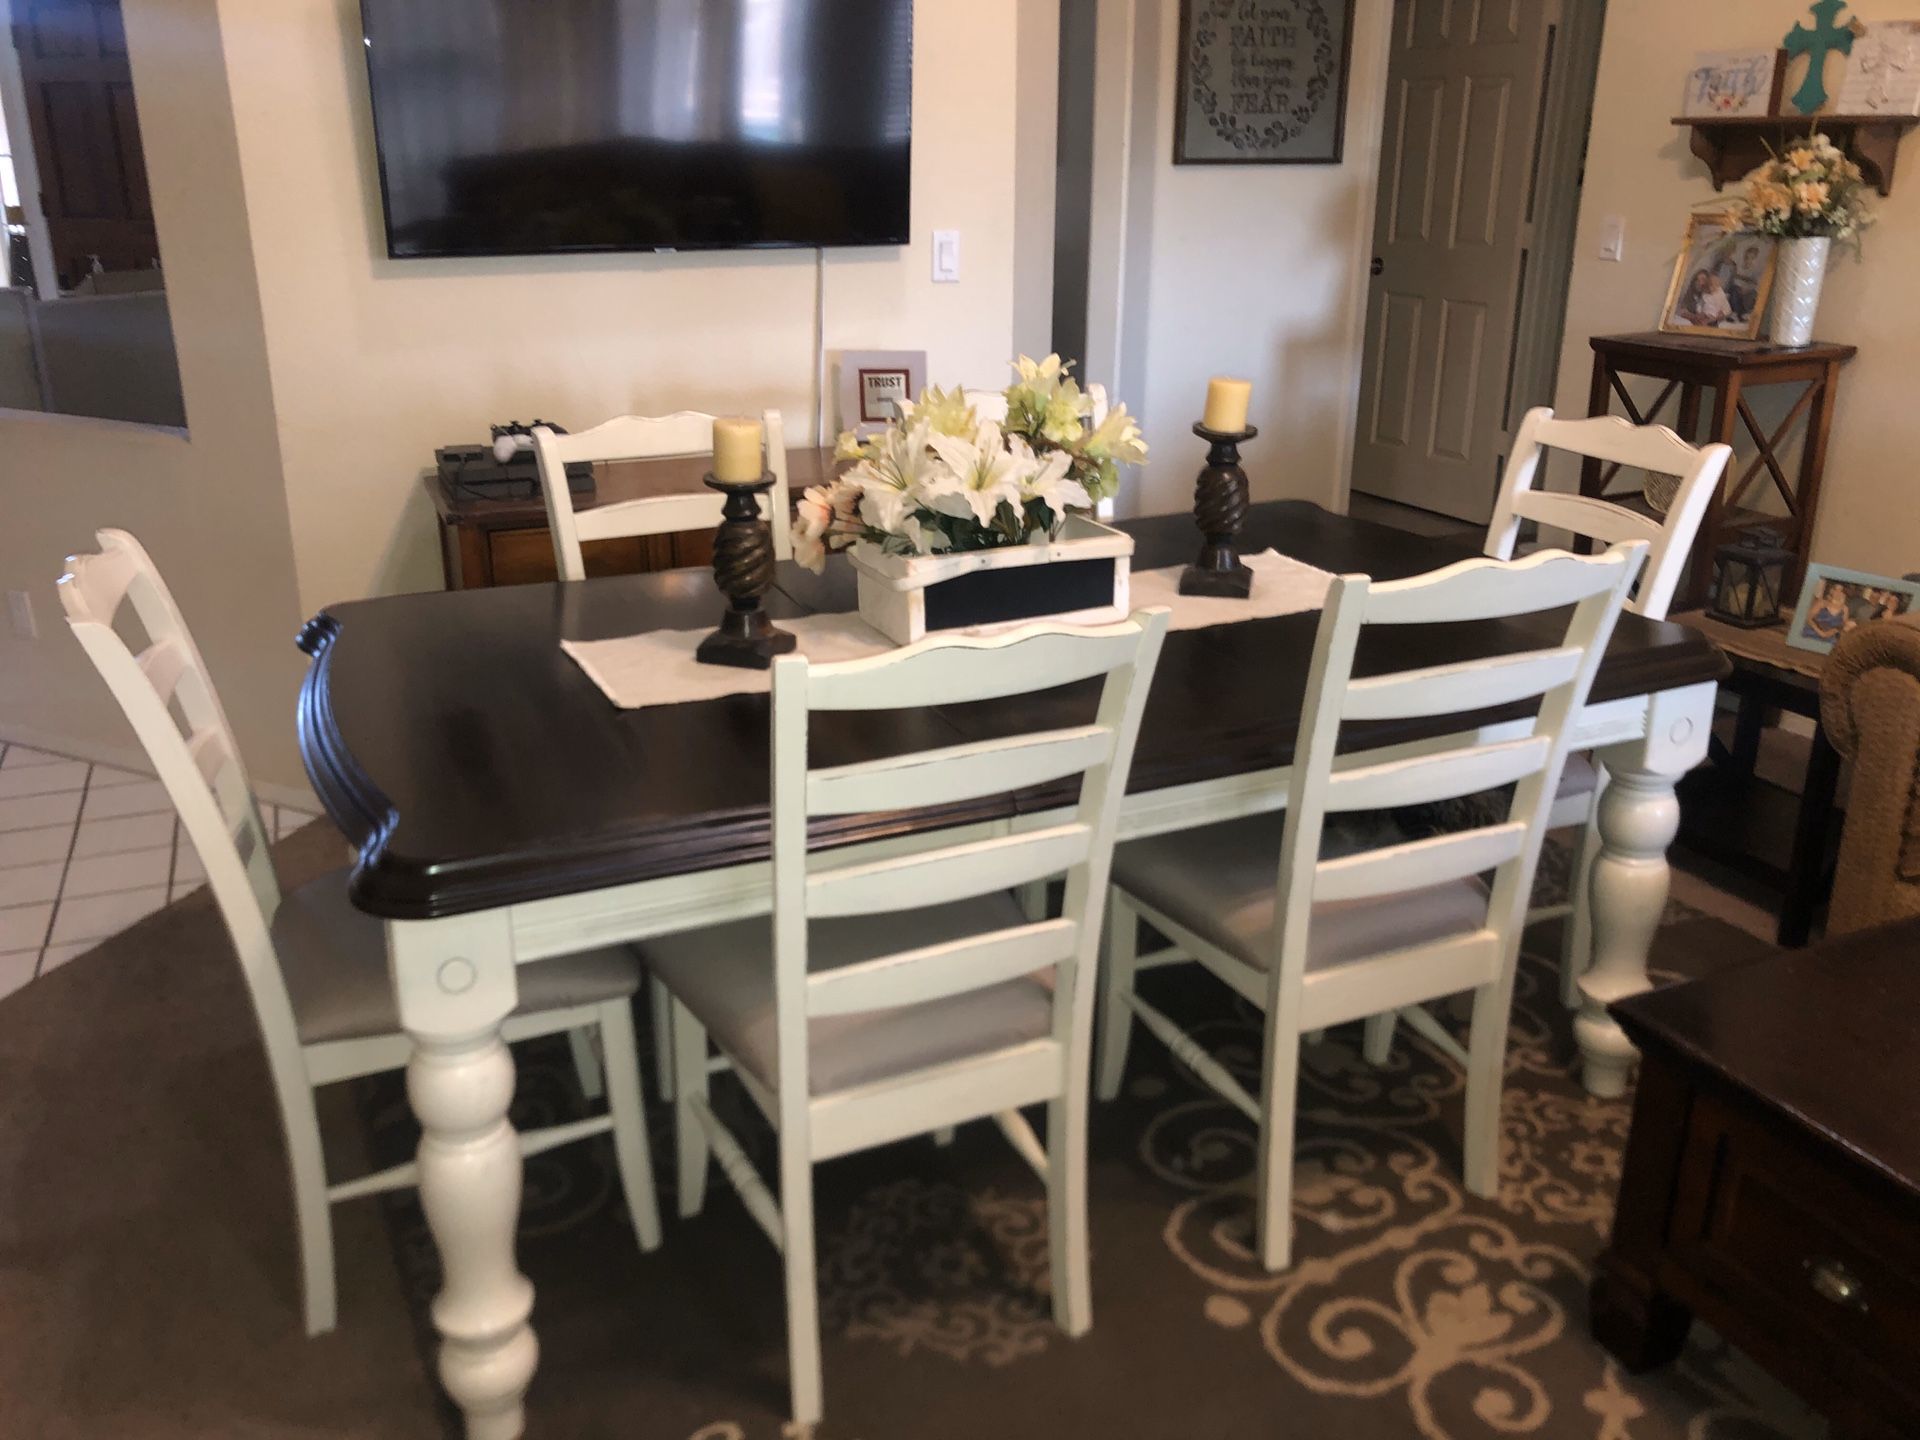 Dining table dinner table kitchen table 6 six chairs solid wood cream off white distressed farmhouse